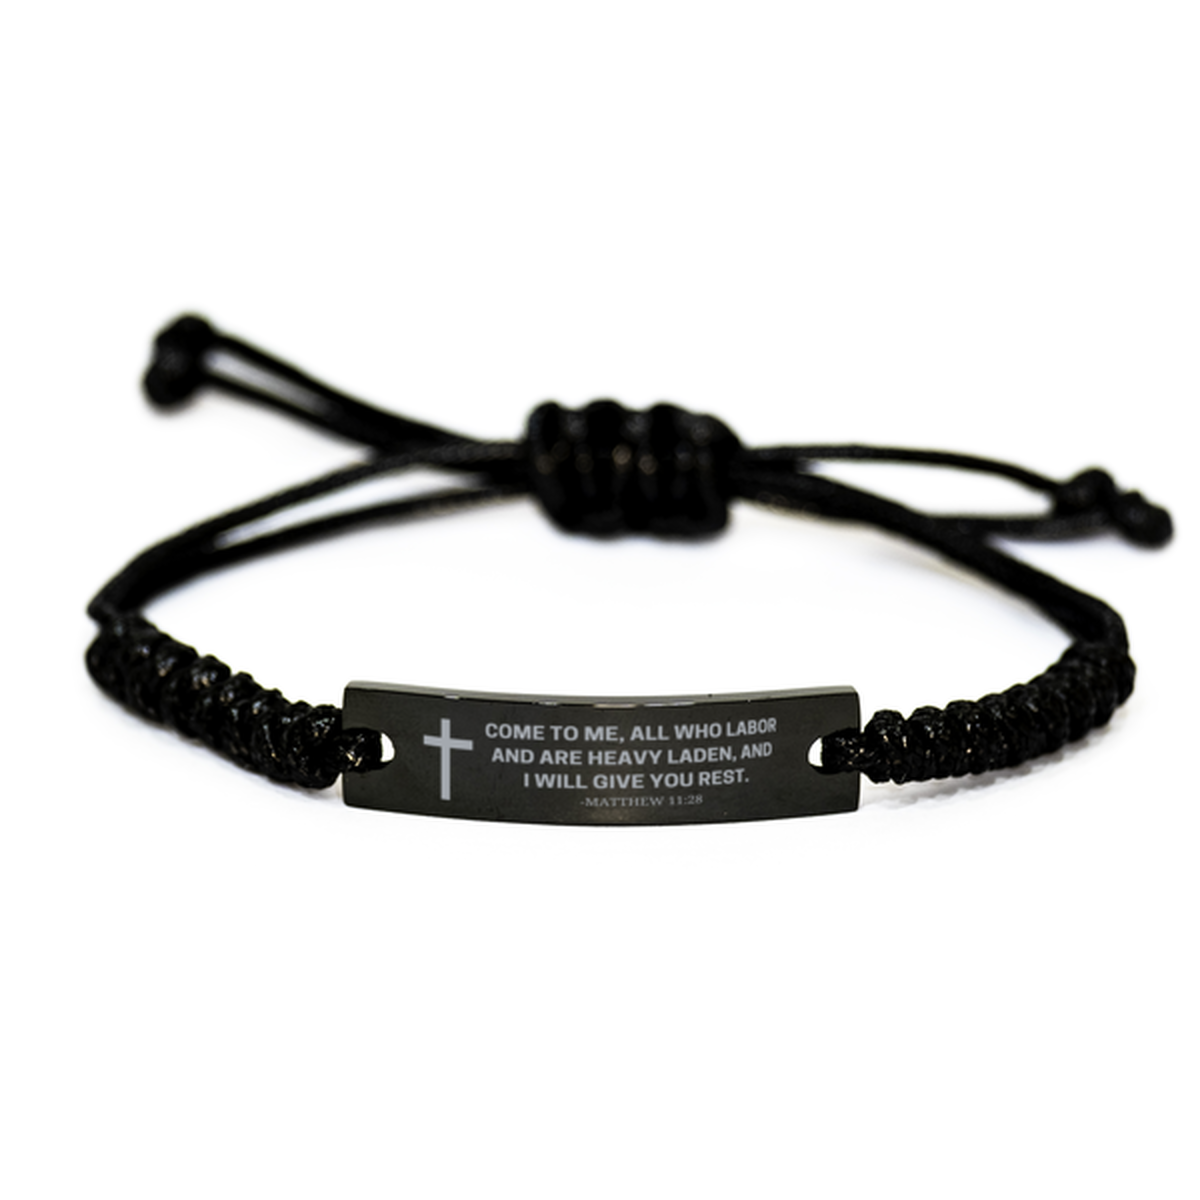 Baptism Gifts For Teenage Boys Girls, Christian Bible Verse Black Rope Bracelet, Come to me, all who labor, Catholic Confirmation Gifts for Son, Godson, Grandson, Nephew